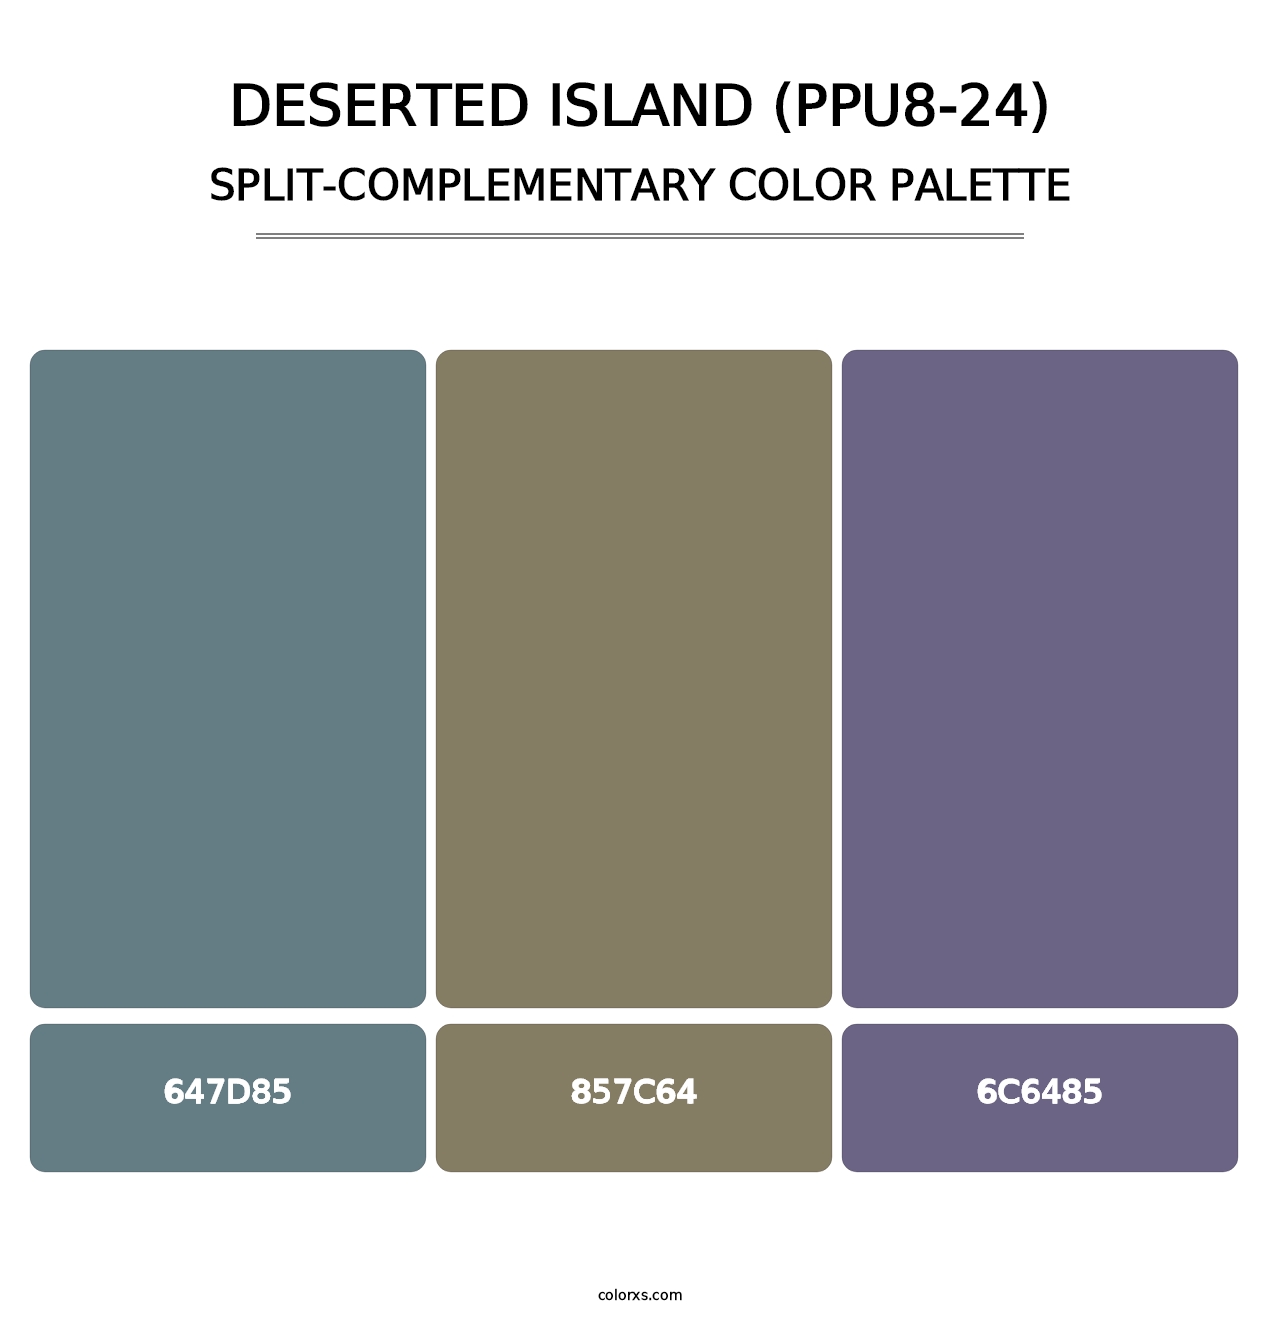 Deserted Island (PPU8-24) - Split-Complementary Color Palette